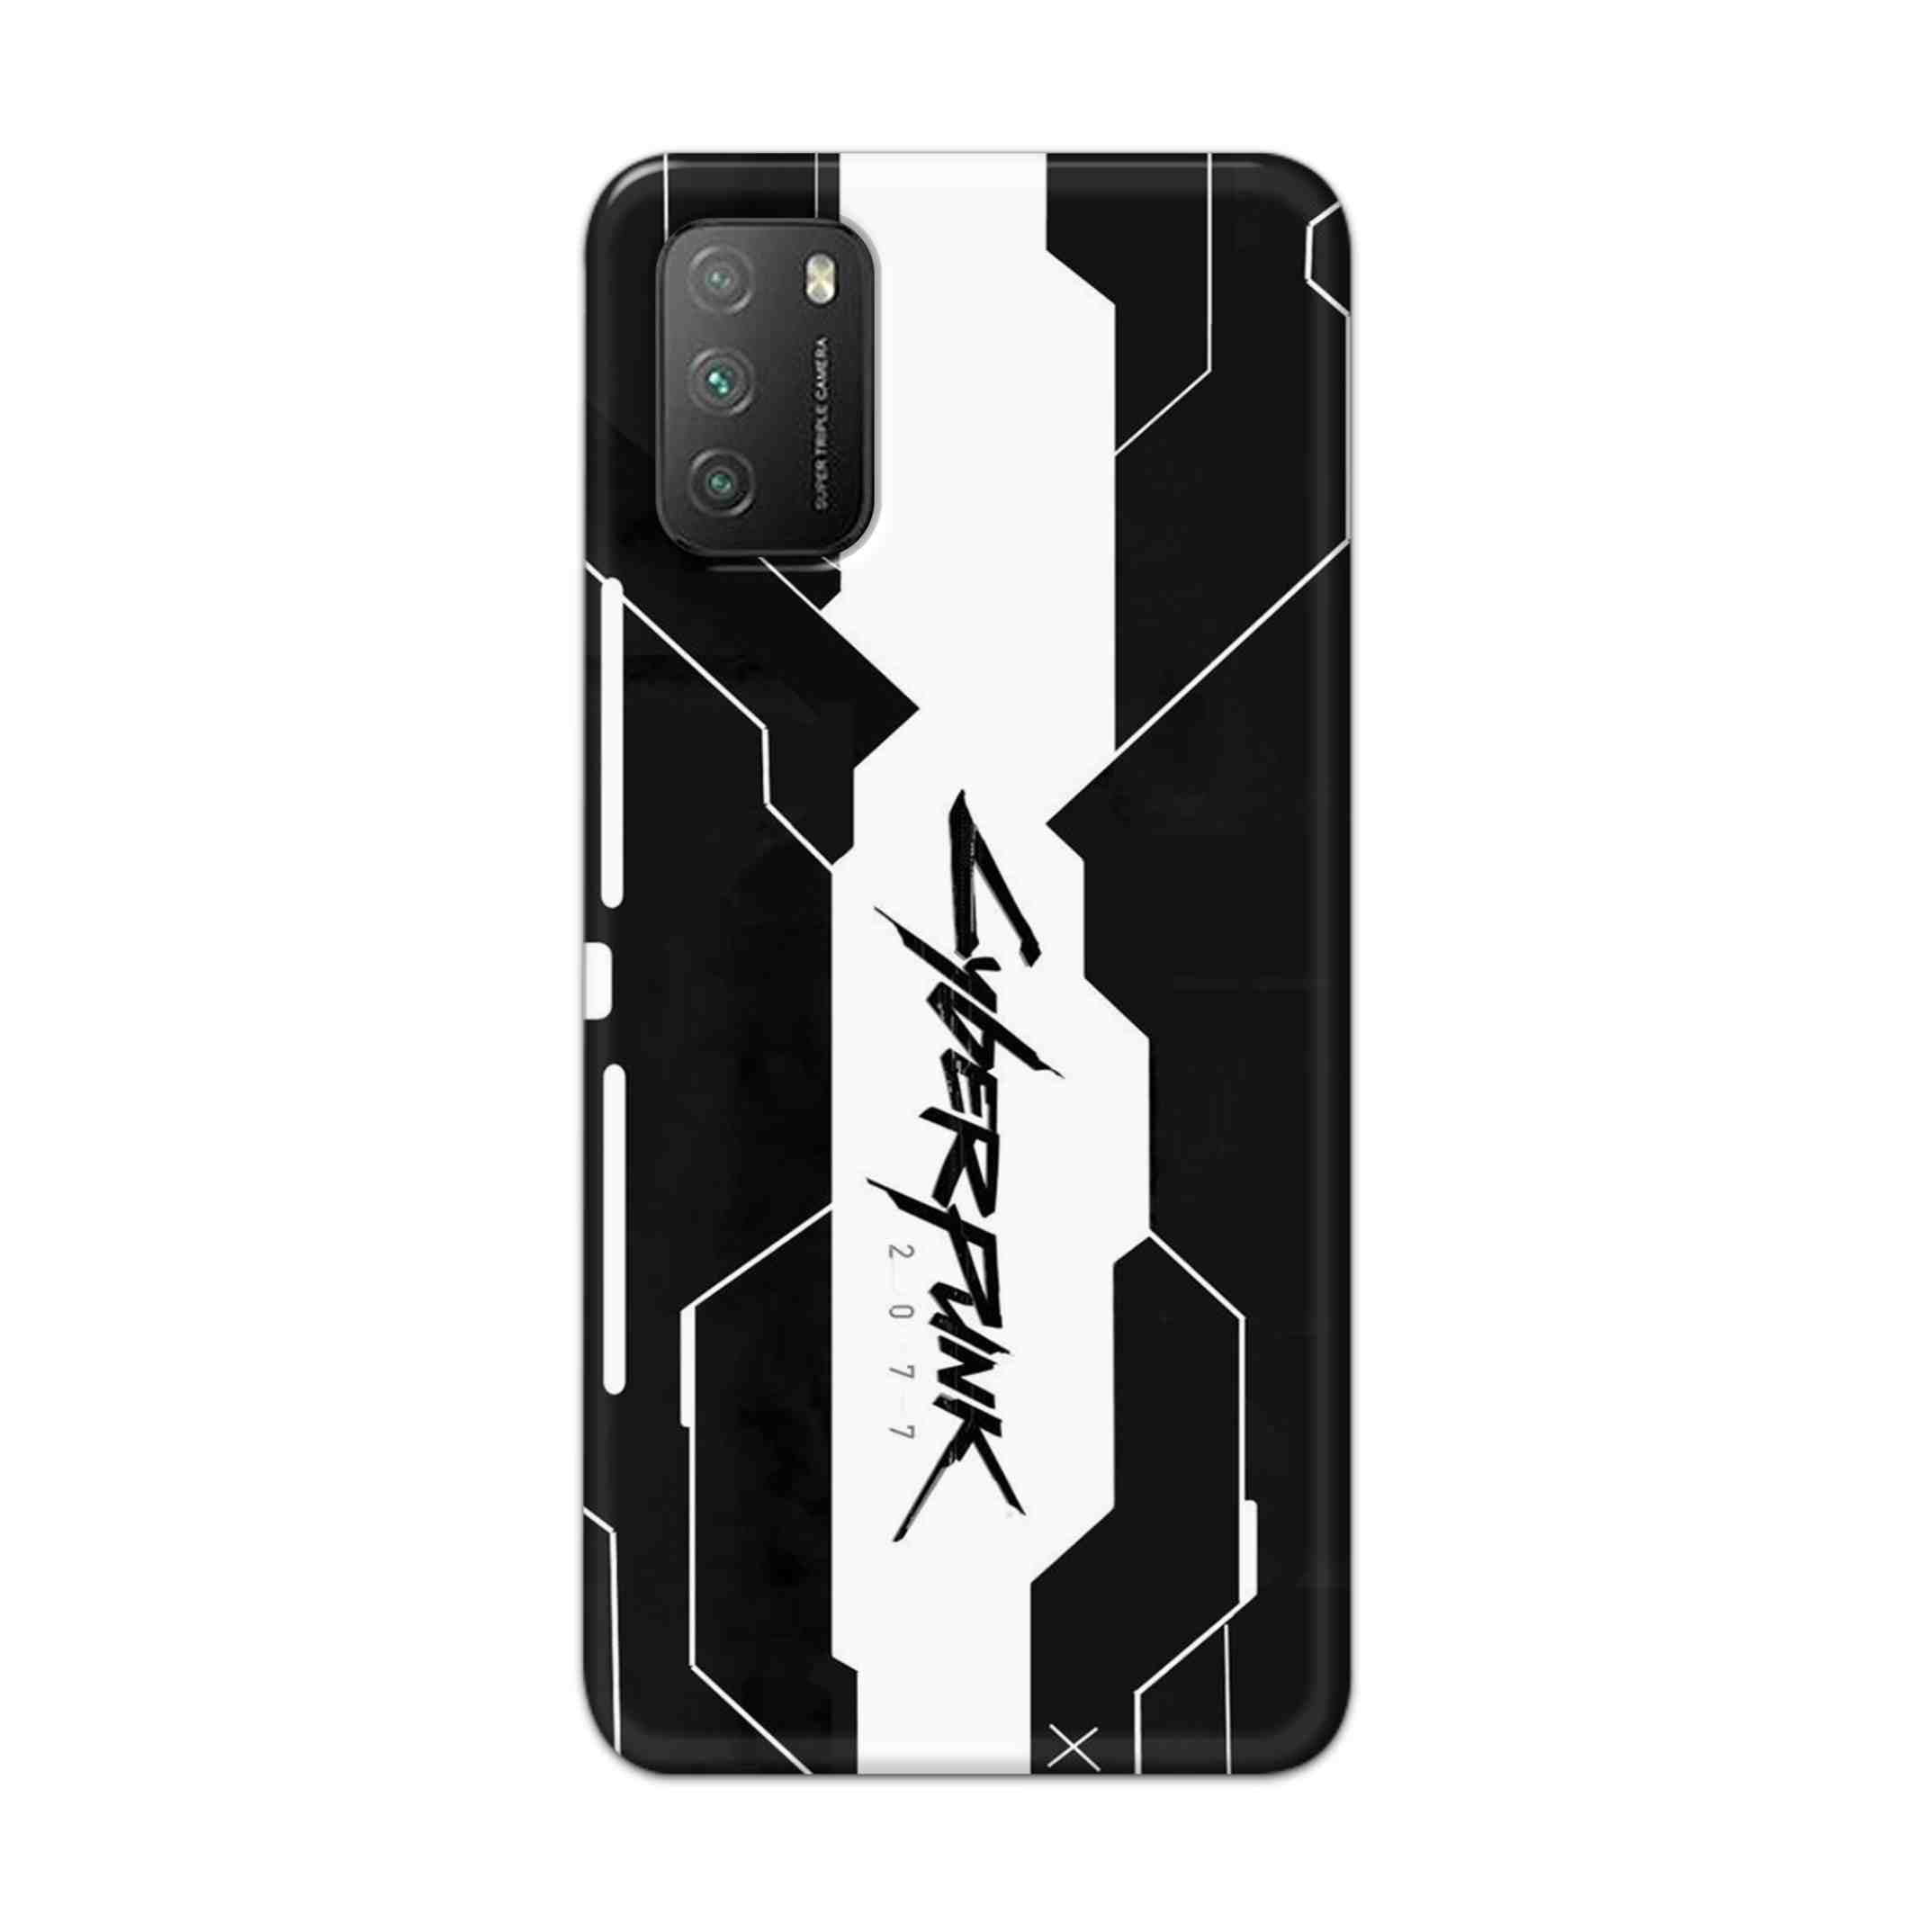 Buy Cyberpunk 2077 Art Hard Back Mobile Phone Case Cover For Poco M3 Online